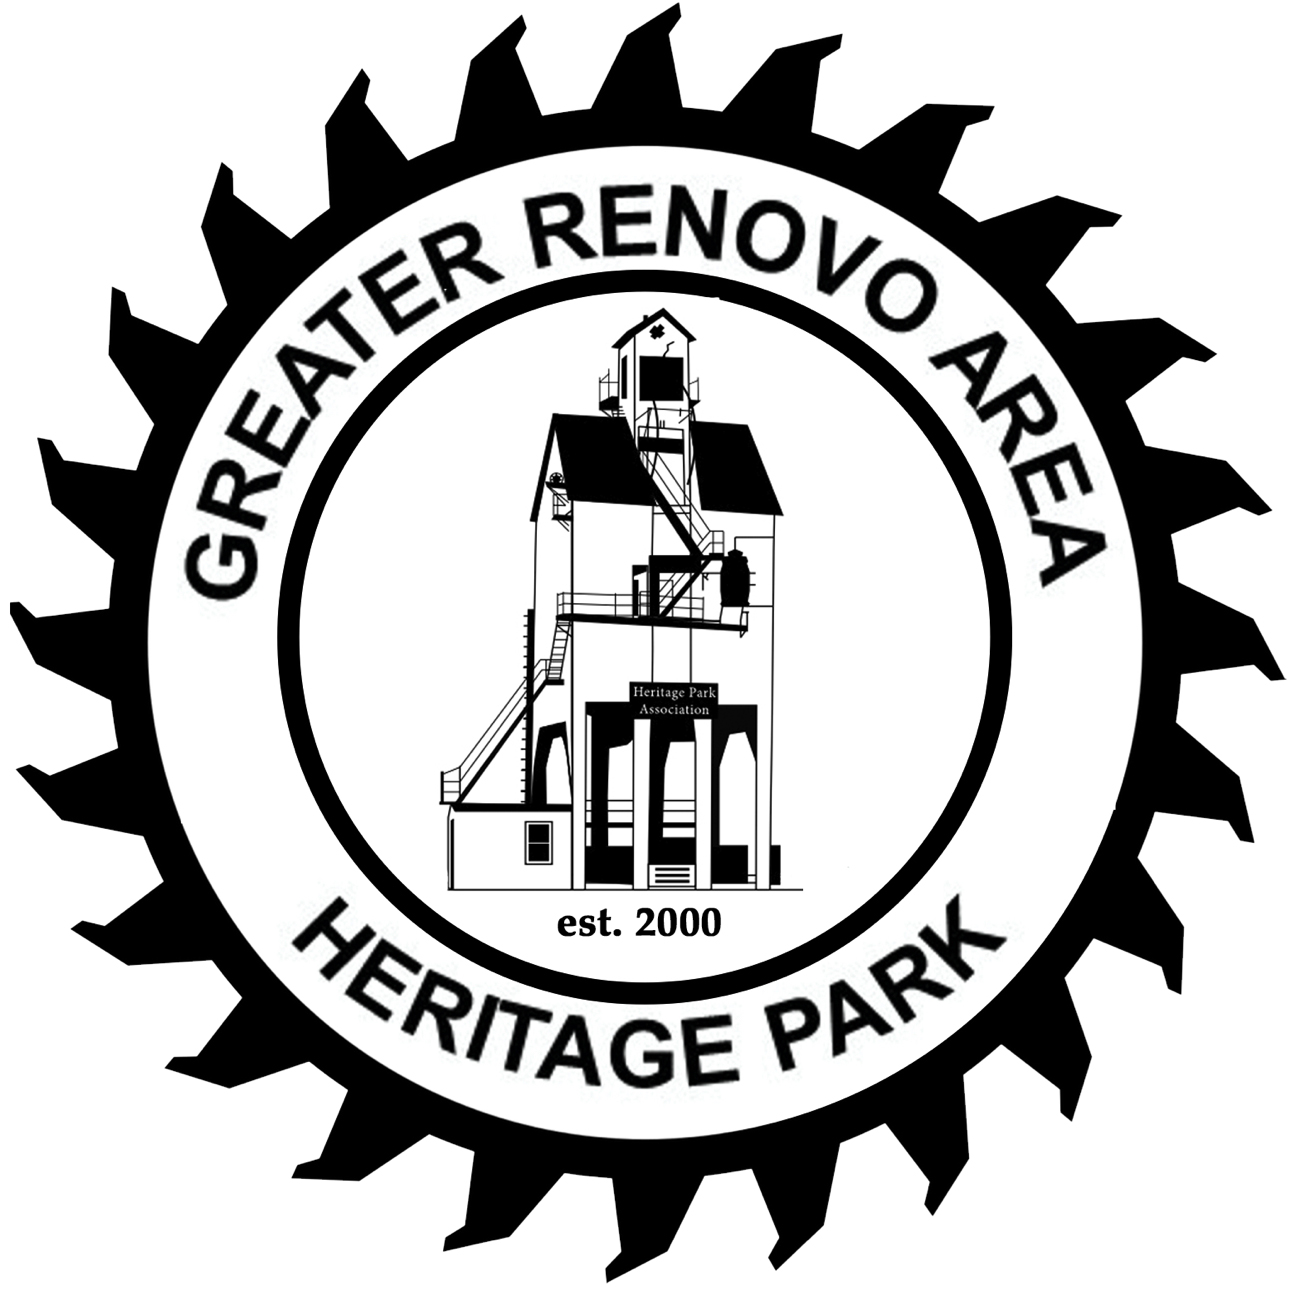 The Greater Renovo Area Heritage Park | Shop | The Greater Renovo Area Heritage Park